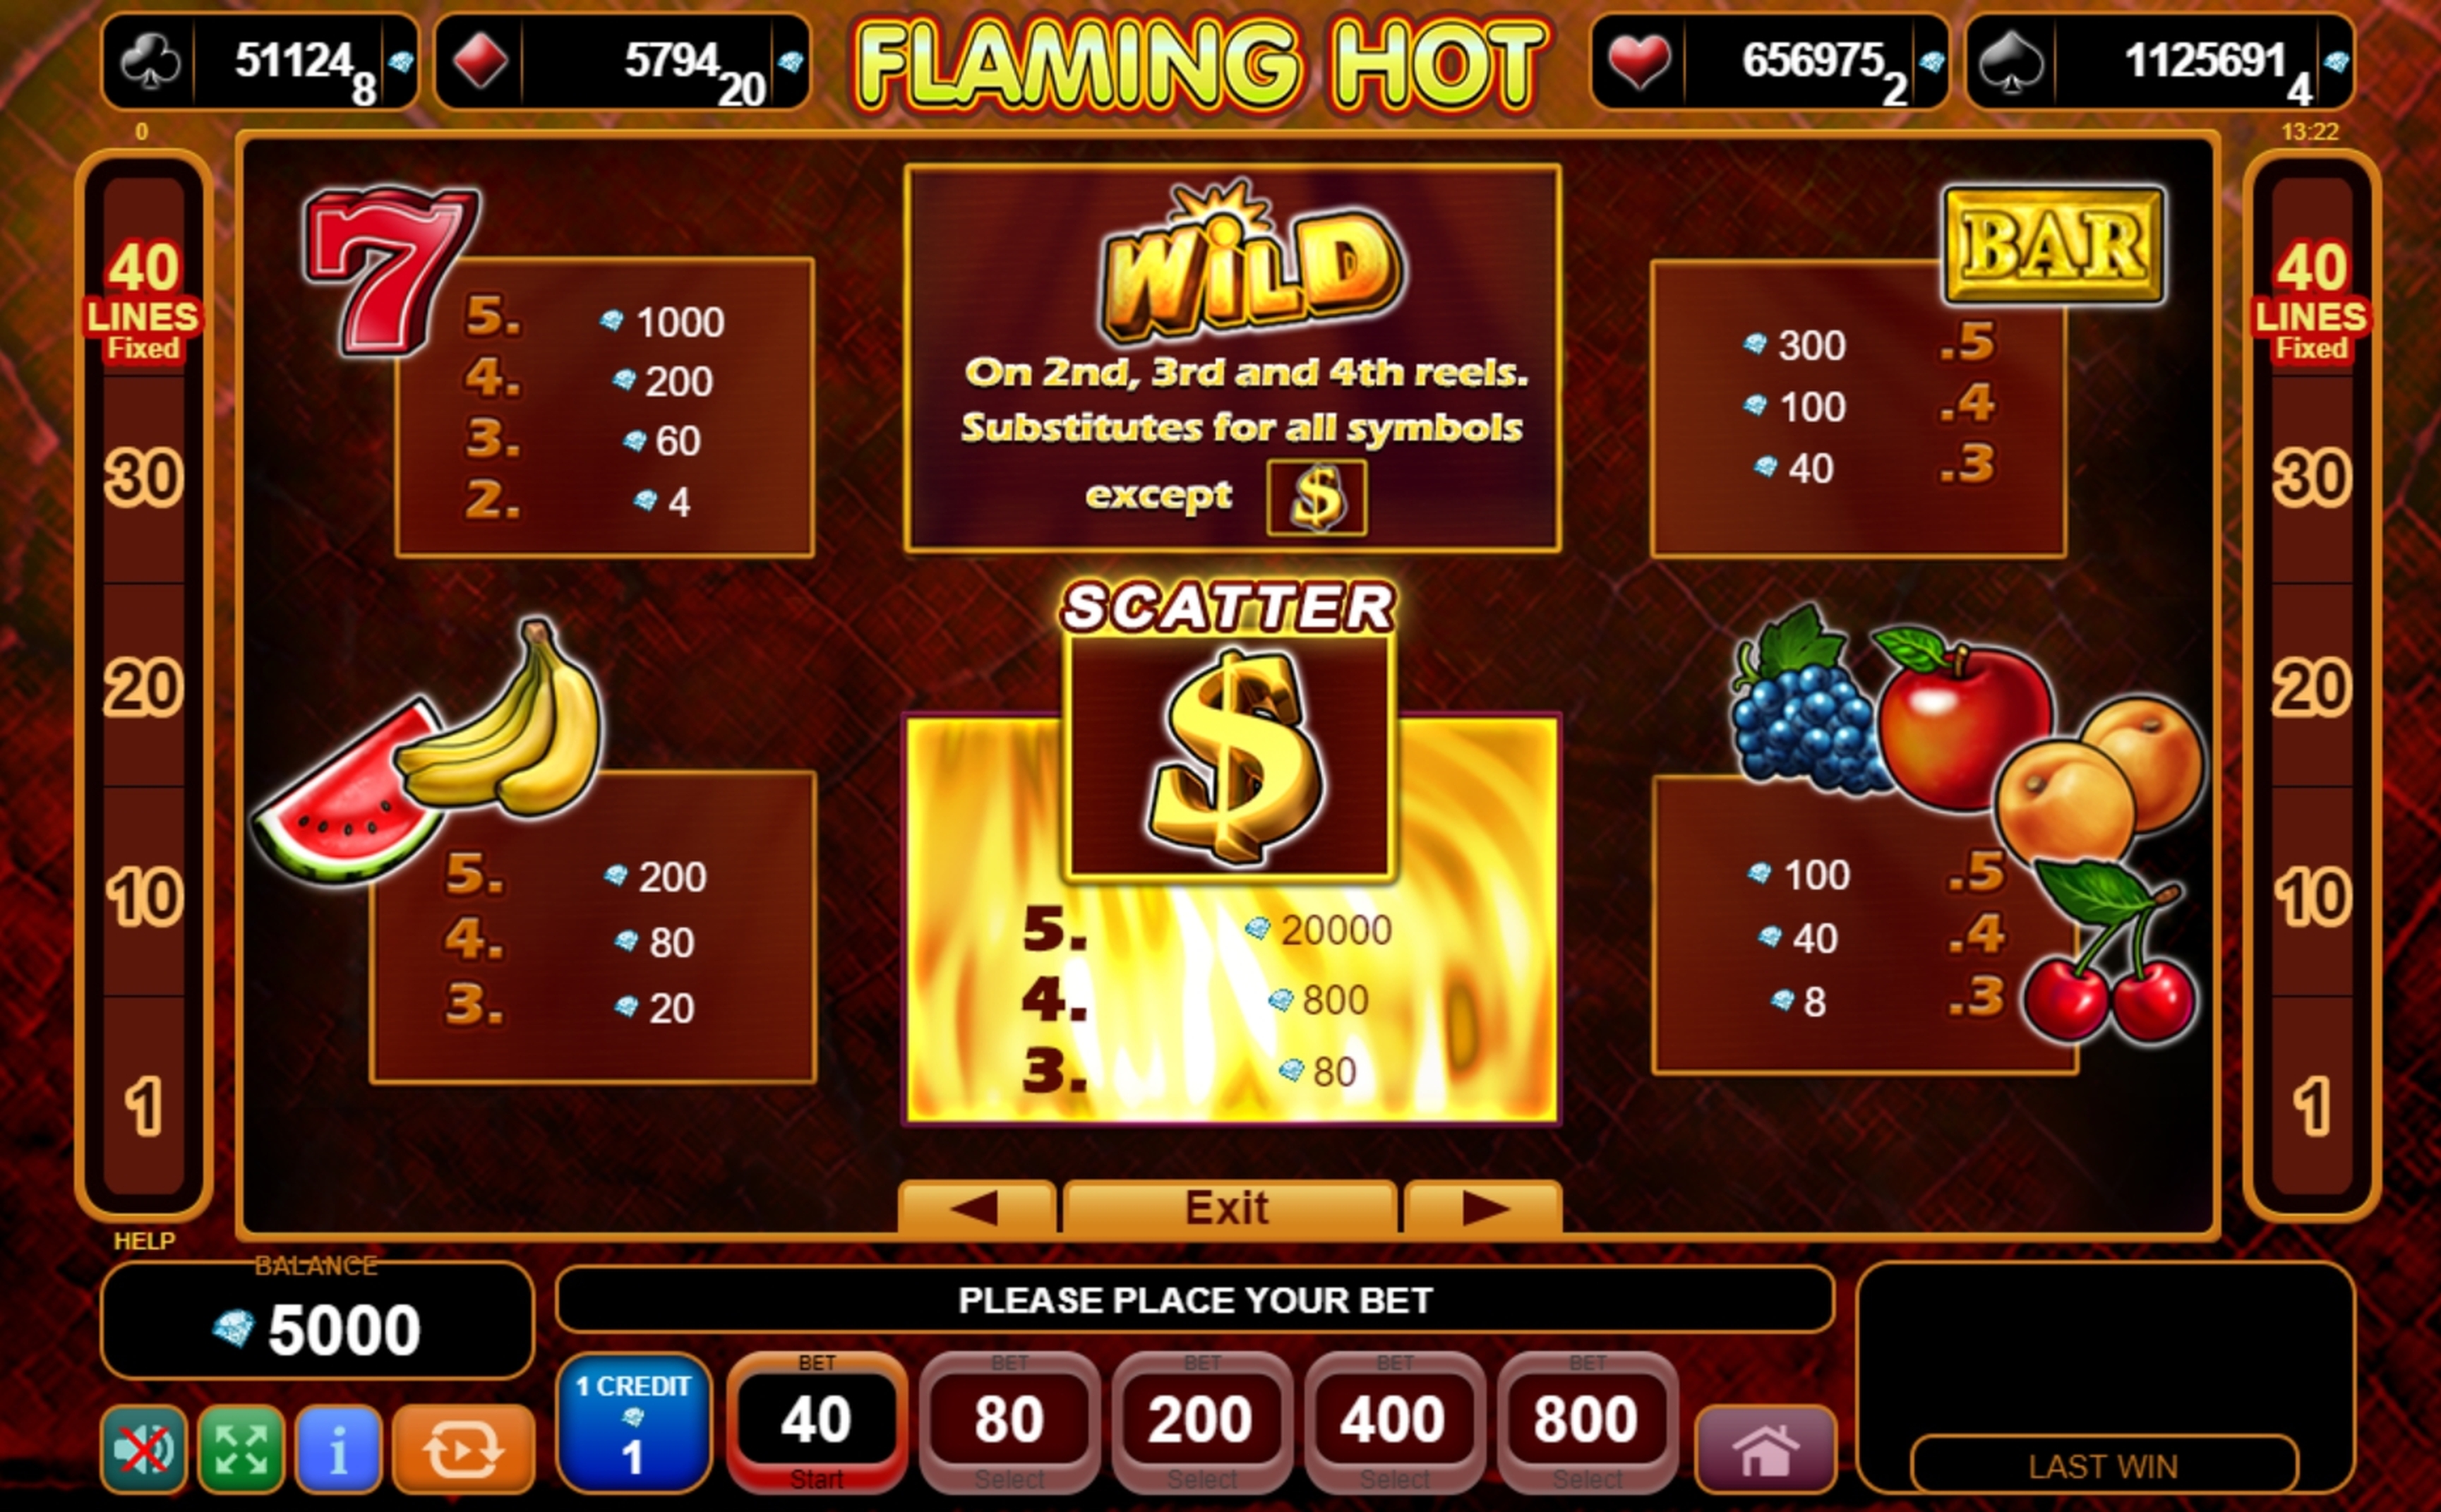 Info of Flaming Hot Slot Game by EGT